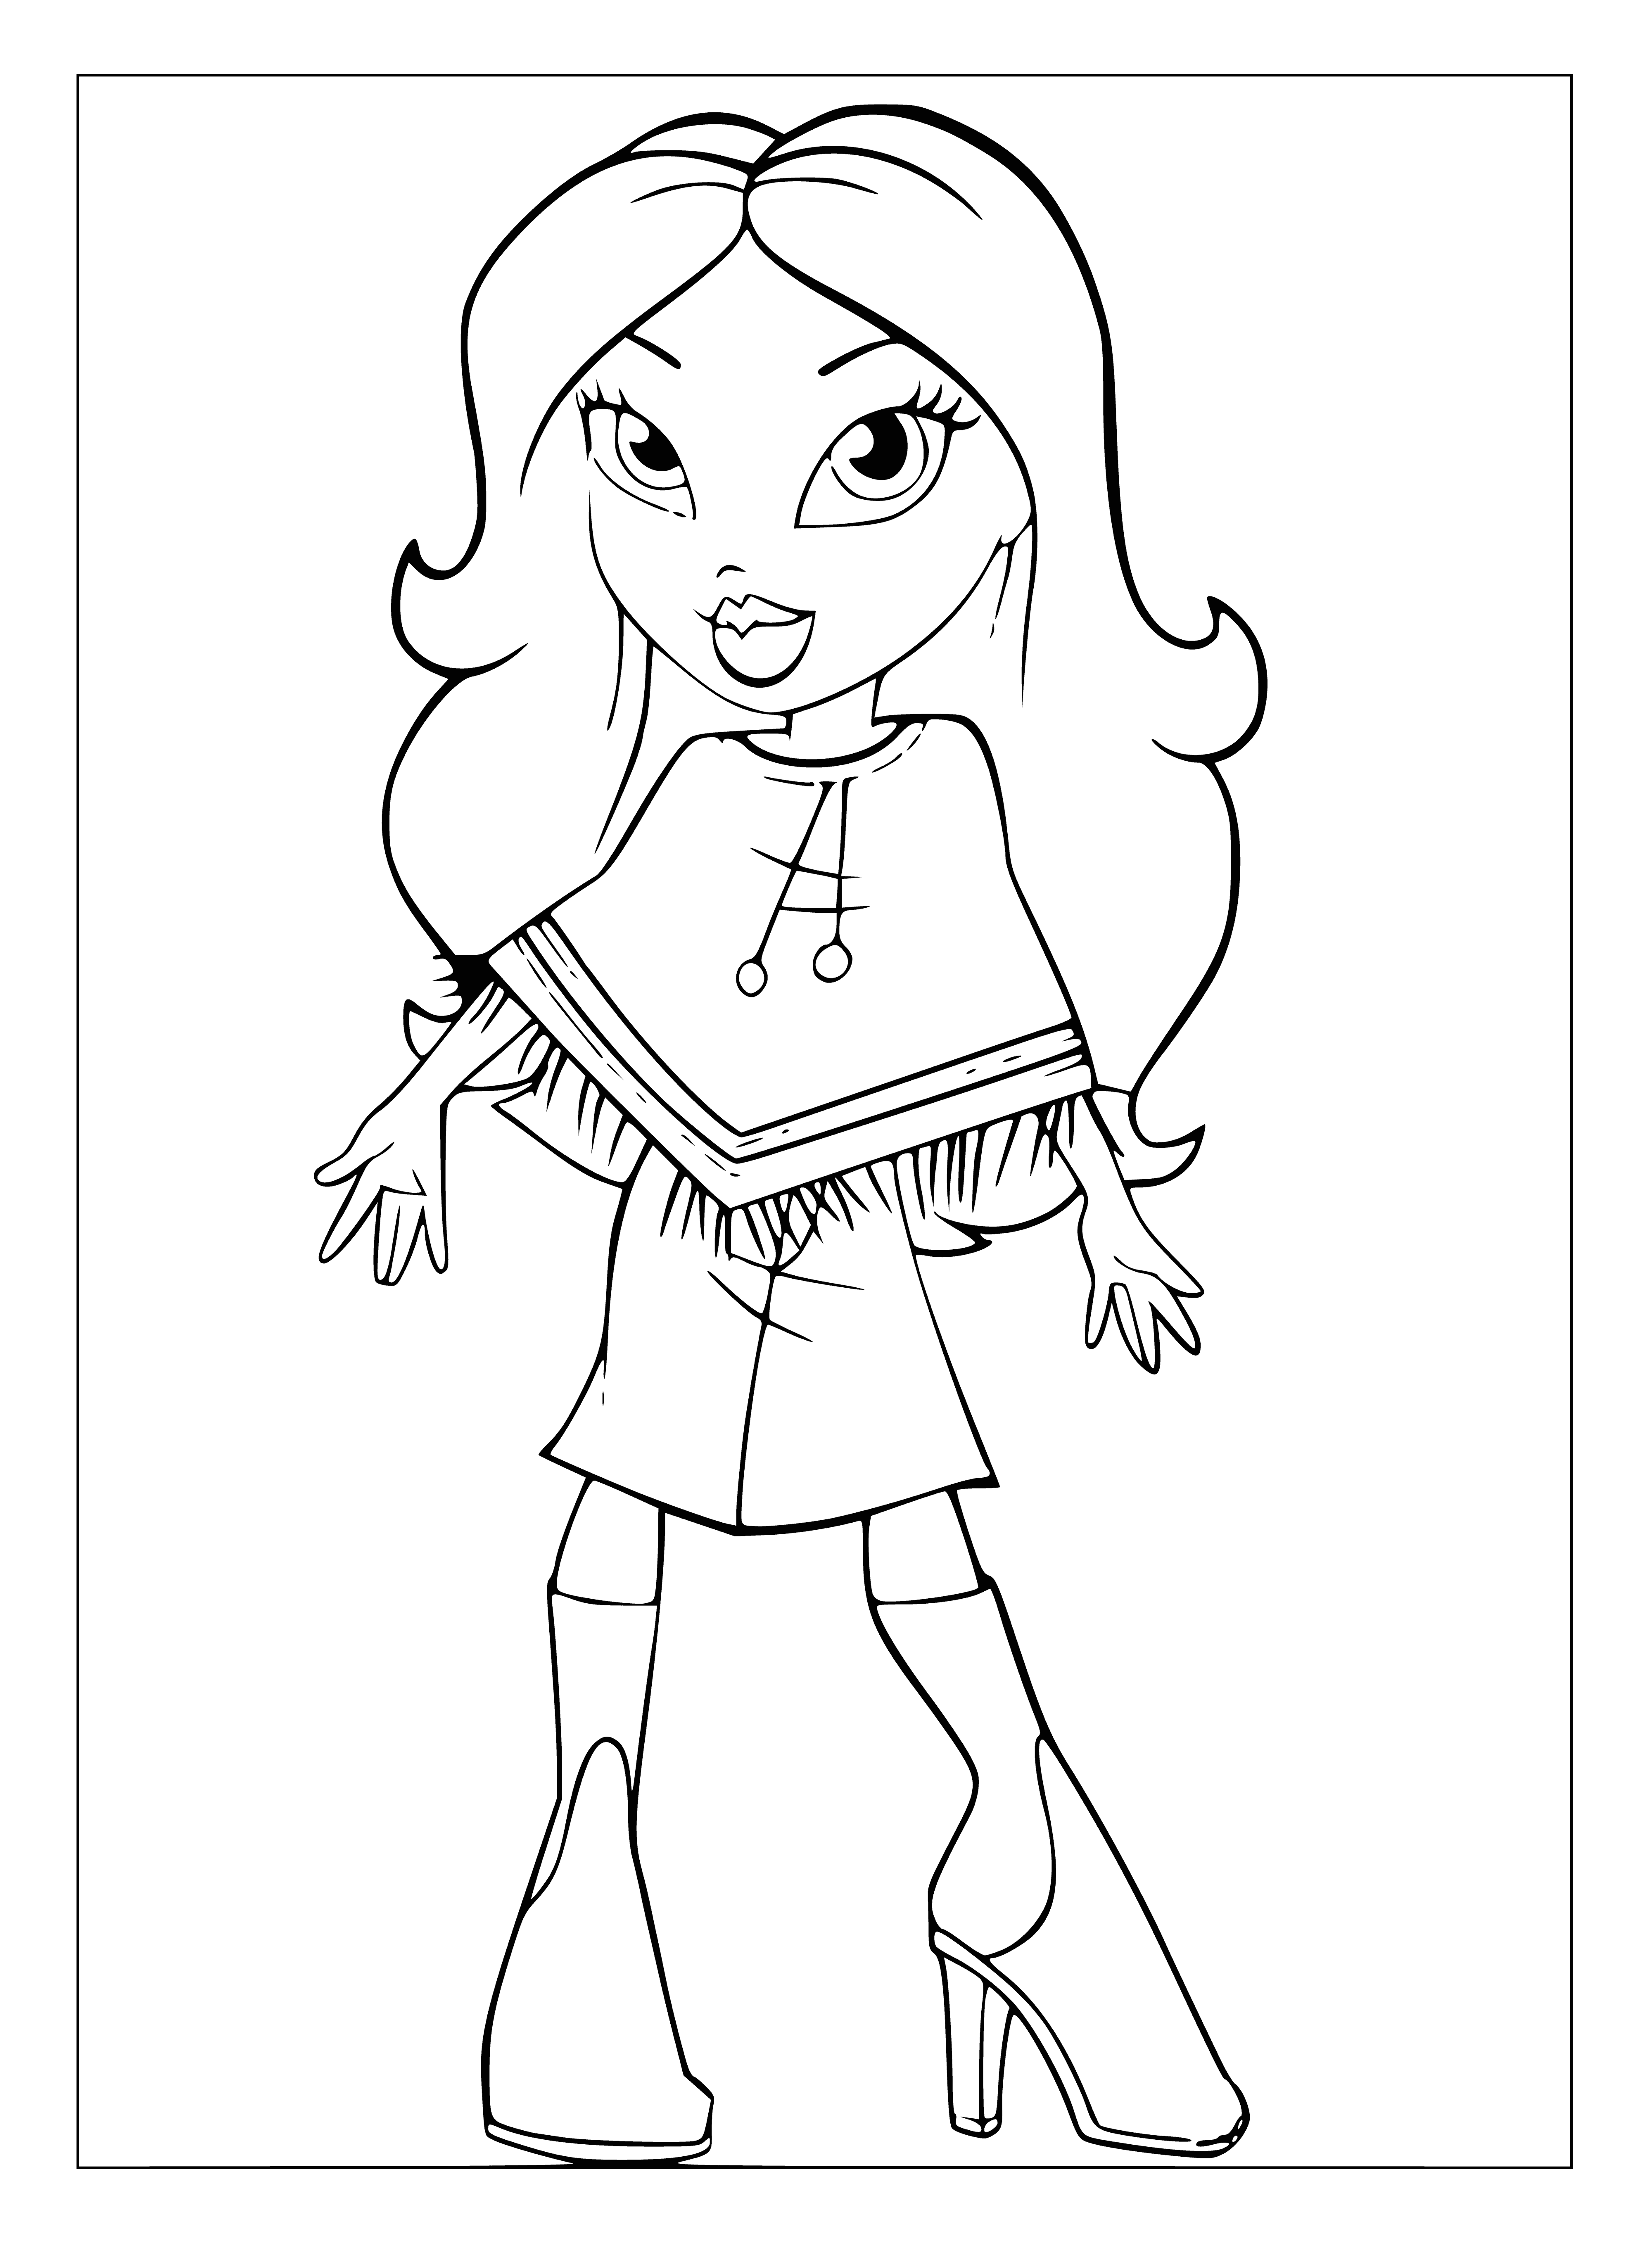 Bratz in a poncho coloring page